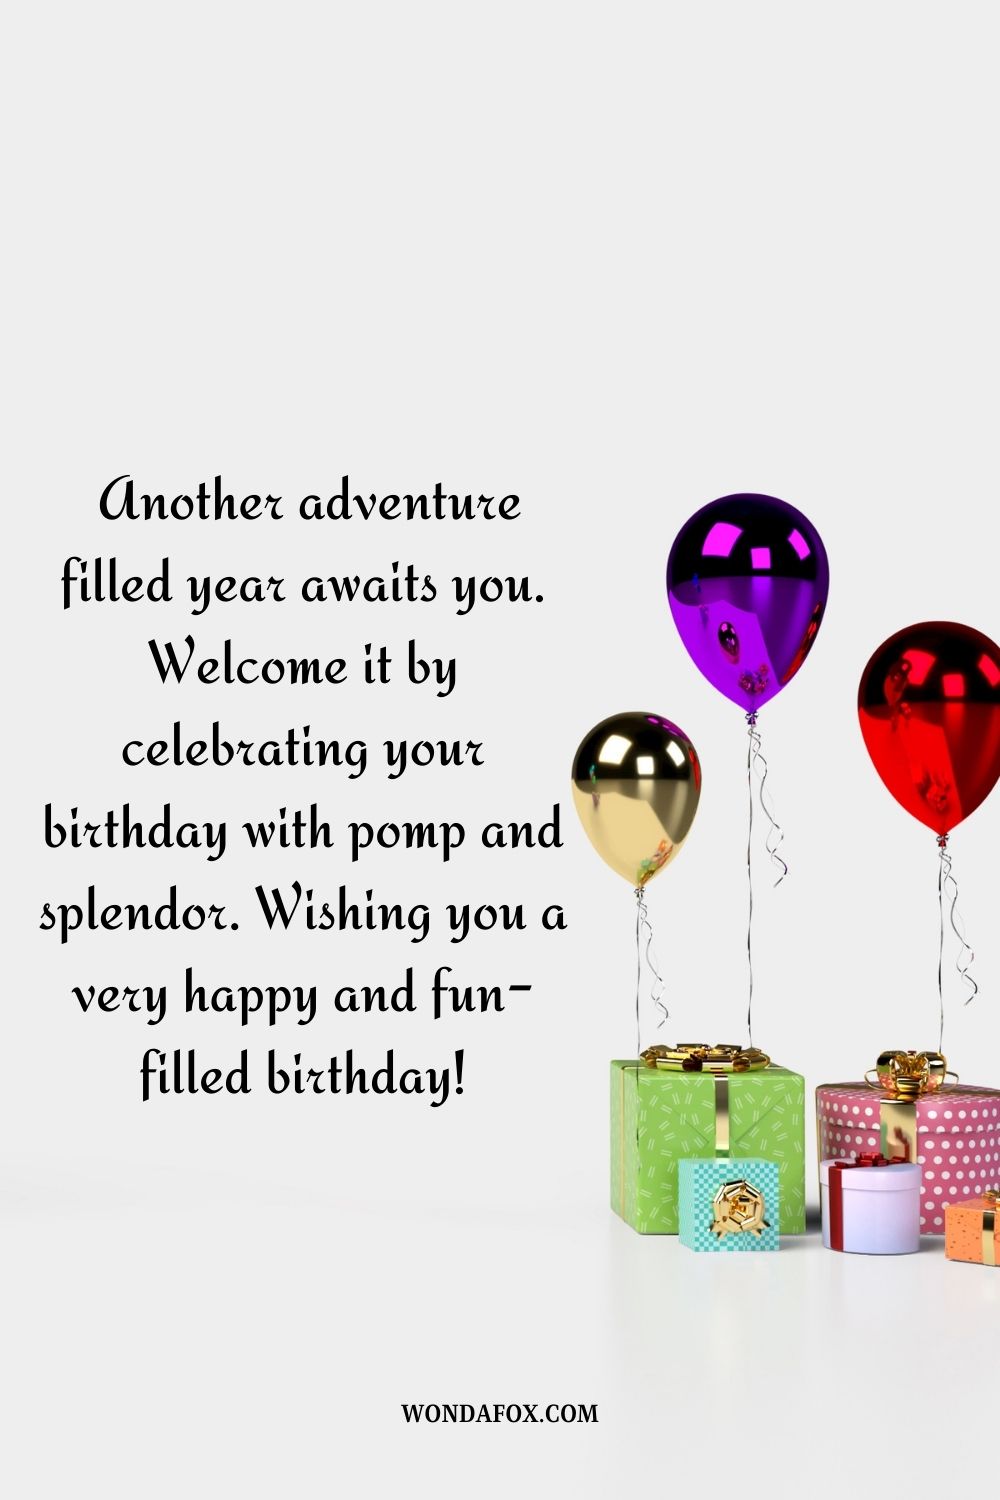 “ Another adventure filled year awaits you. Welcome it by celebrating your birthday with pomp and splendor. Wishing you a very happy and fun-filled birthday!”